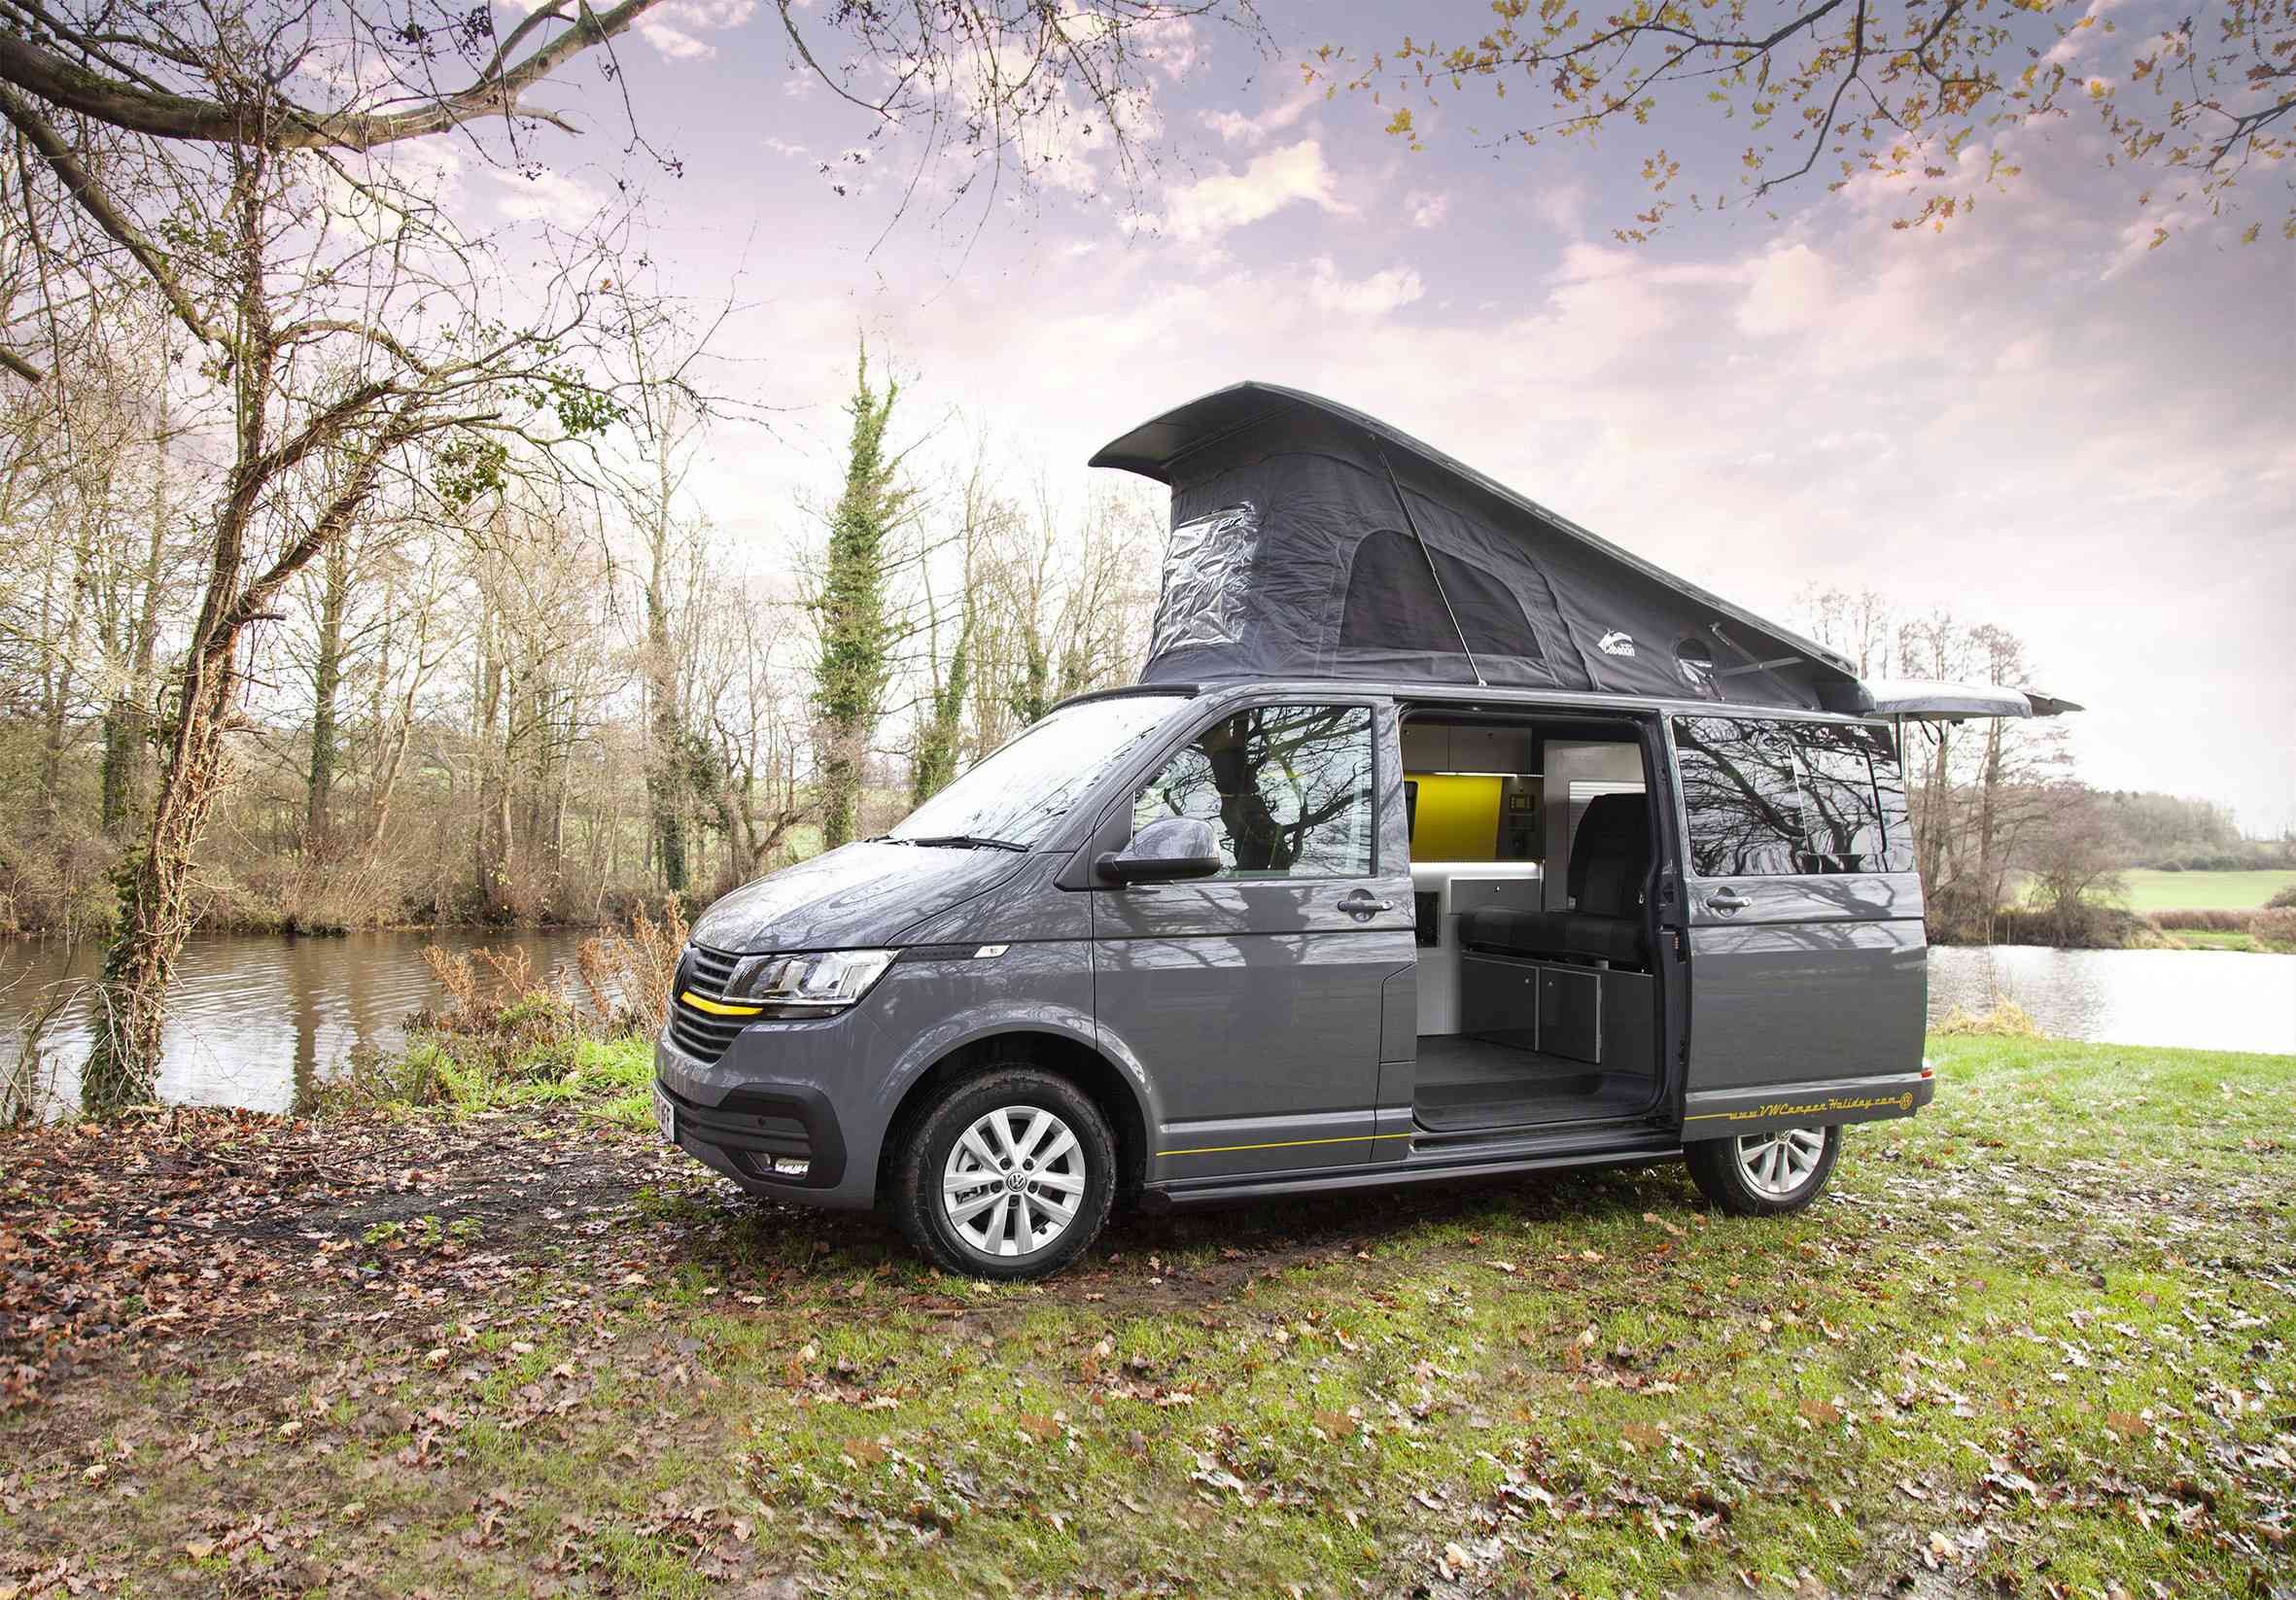 A VW T6 Campervan called Holly-T6 and for hire in Northampton, England